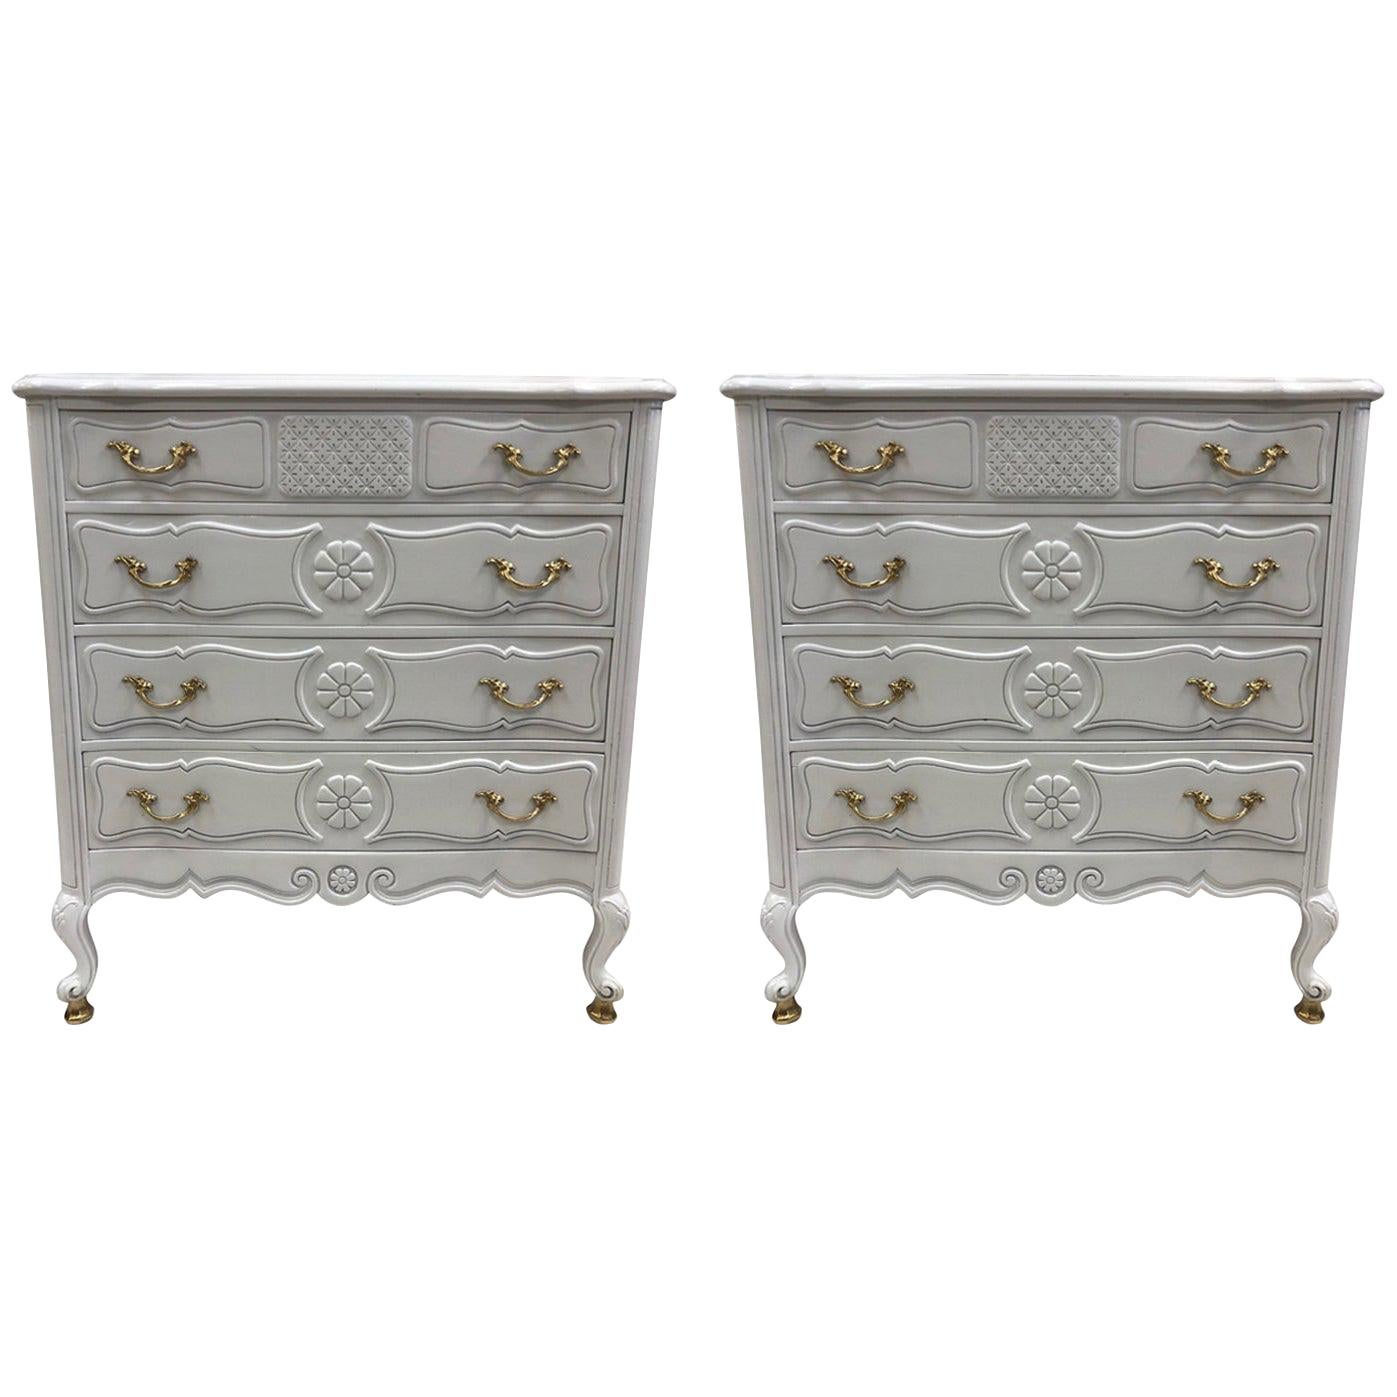 Pair of French Antique Style Marble-Top Chests